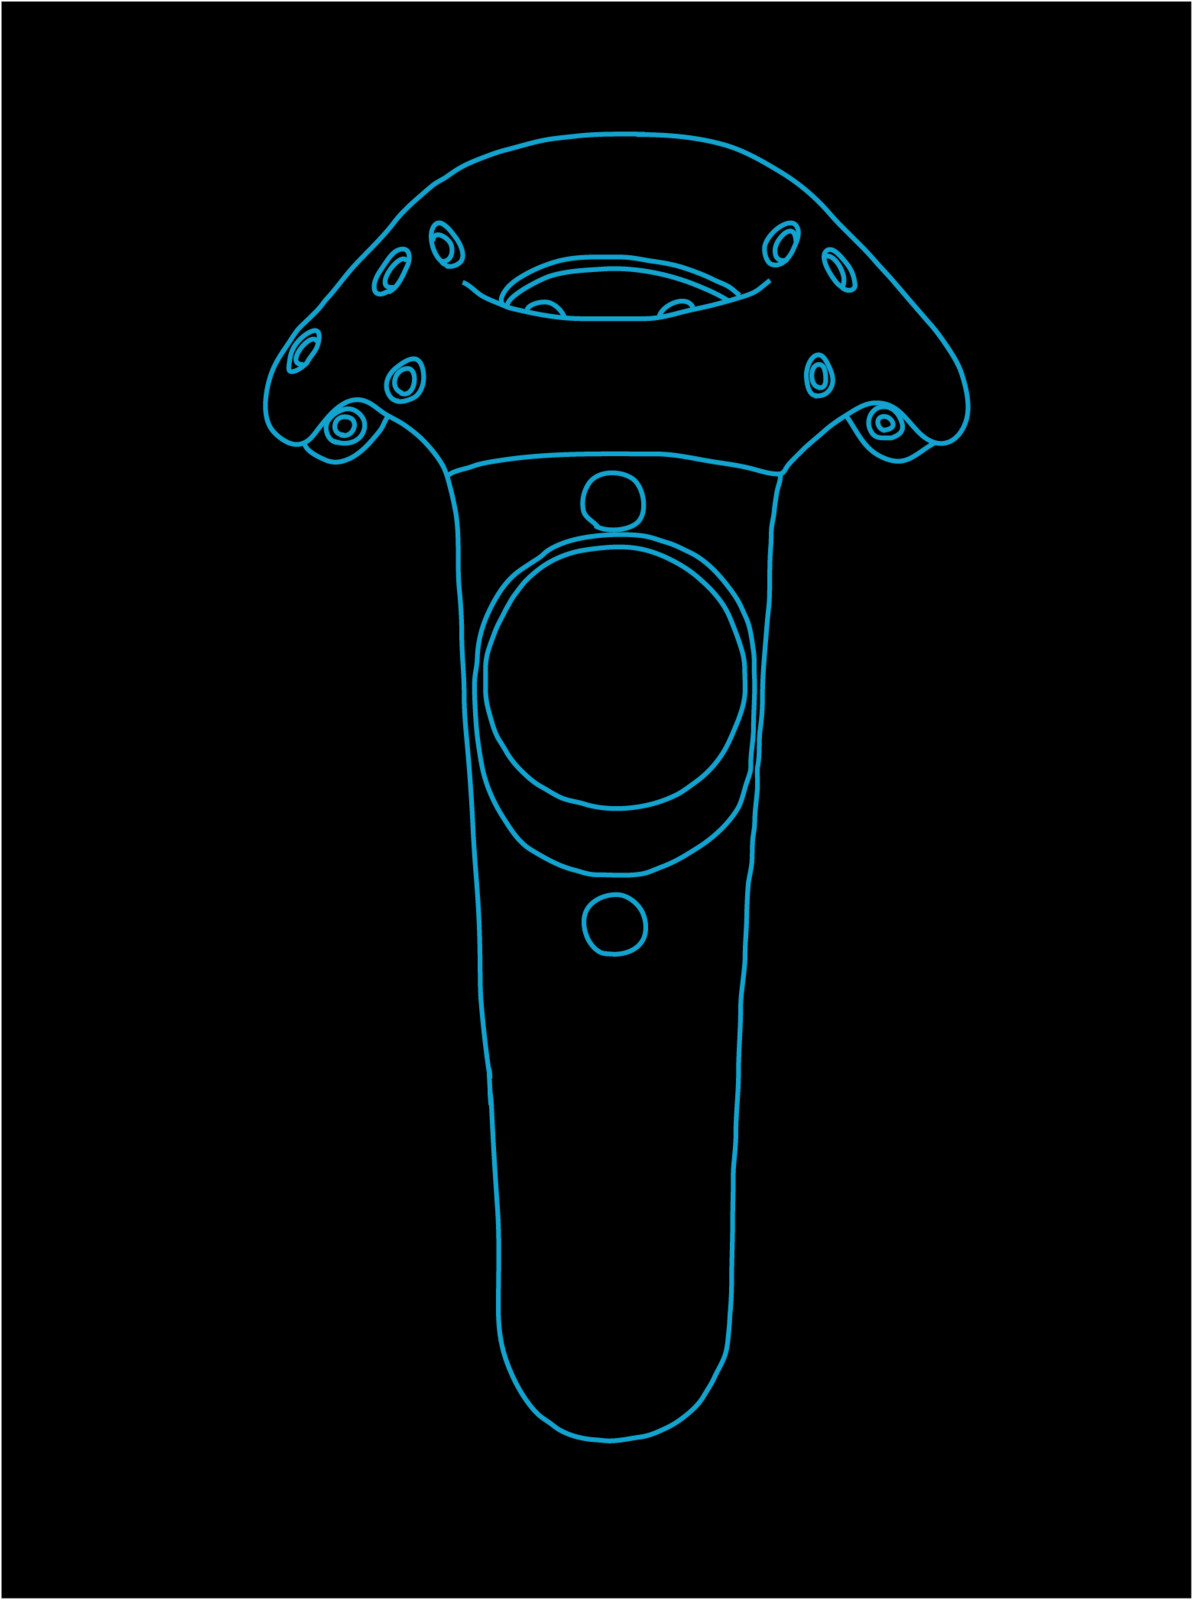 HTC Vive Controller Vector Art (Front) created in Adobe Illustrator